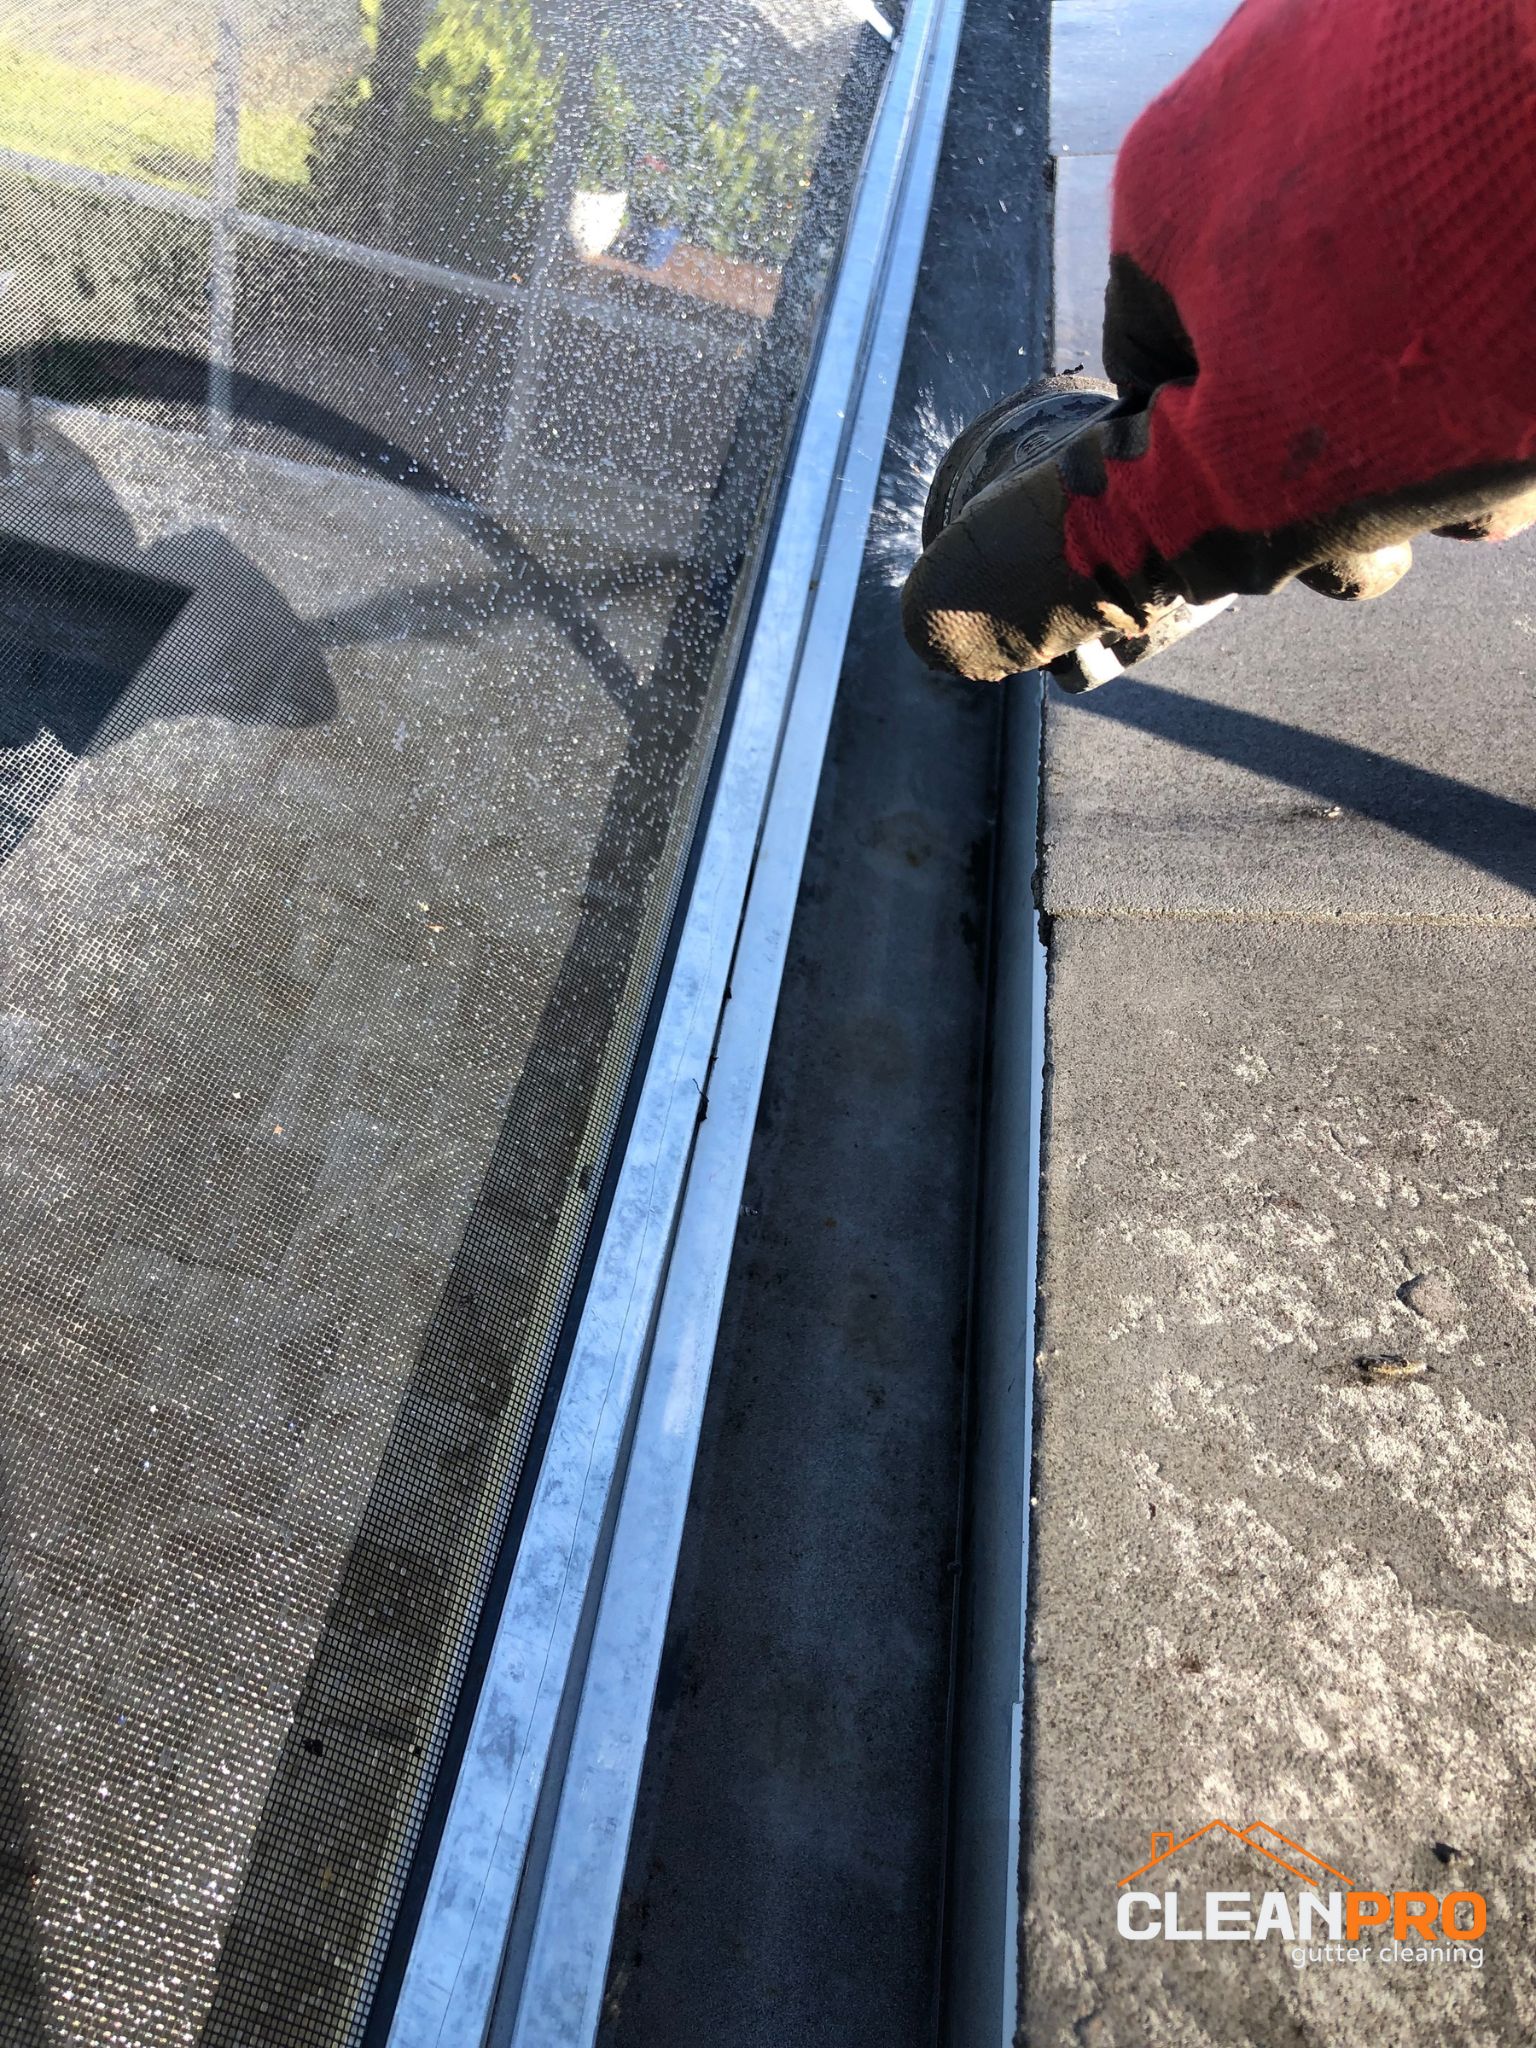 Local Gutter Cleaning in Jacksonville